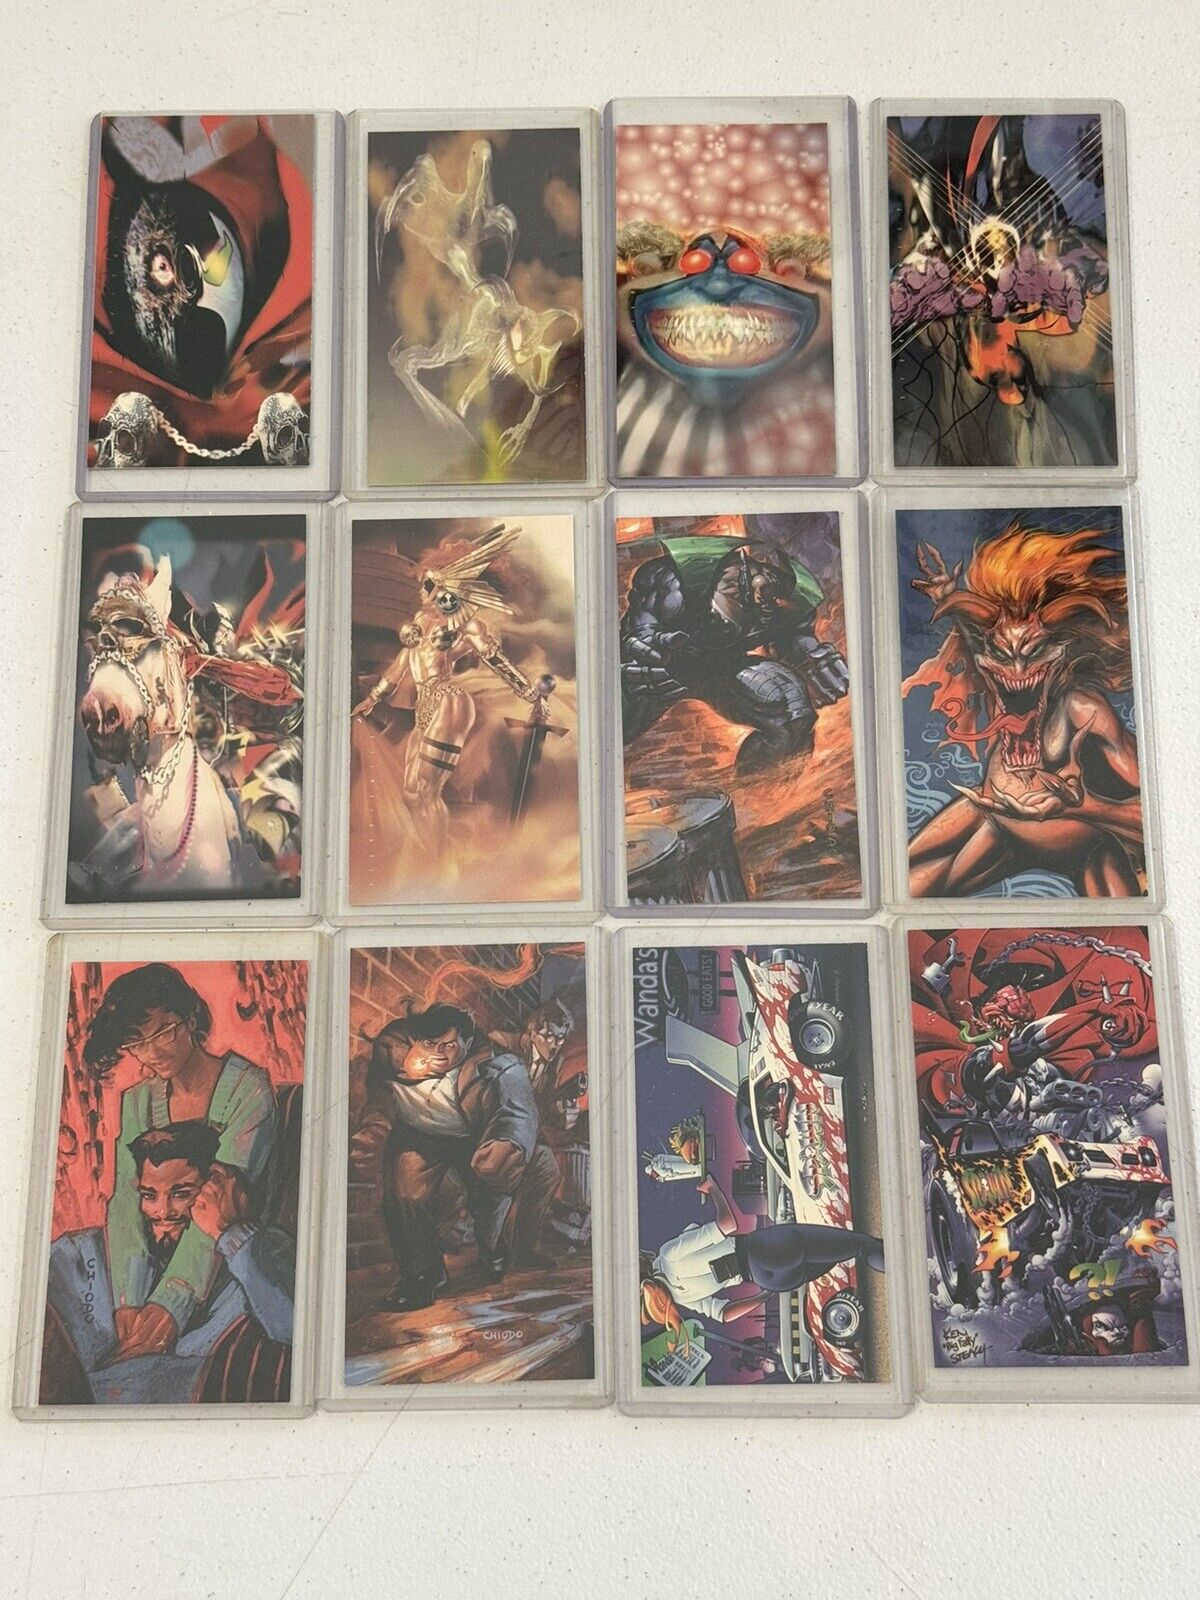 1995 Spawn Widevision Image Chase Card Set of 12 Cards P1-P12 Wildstorm